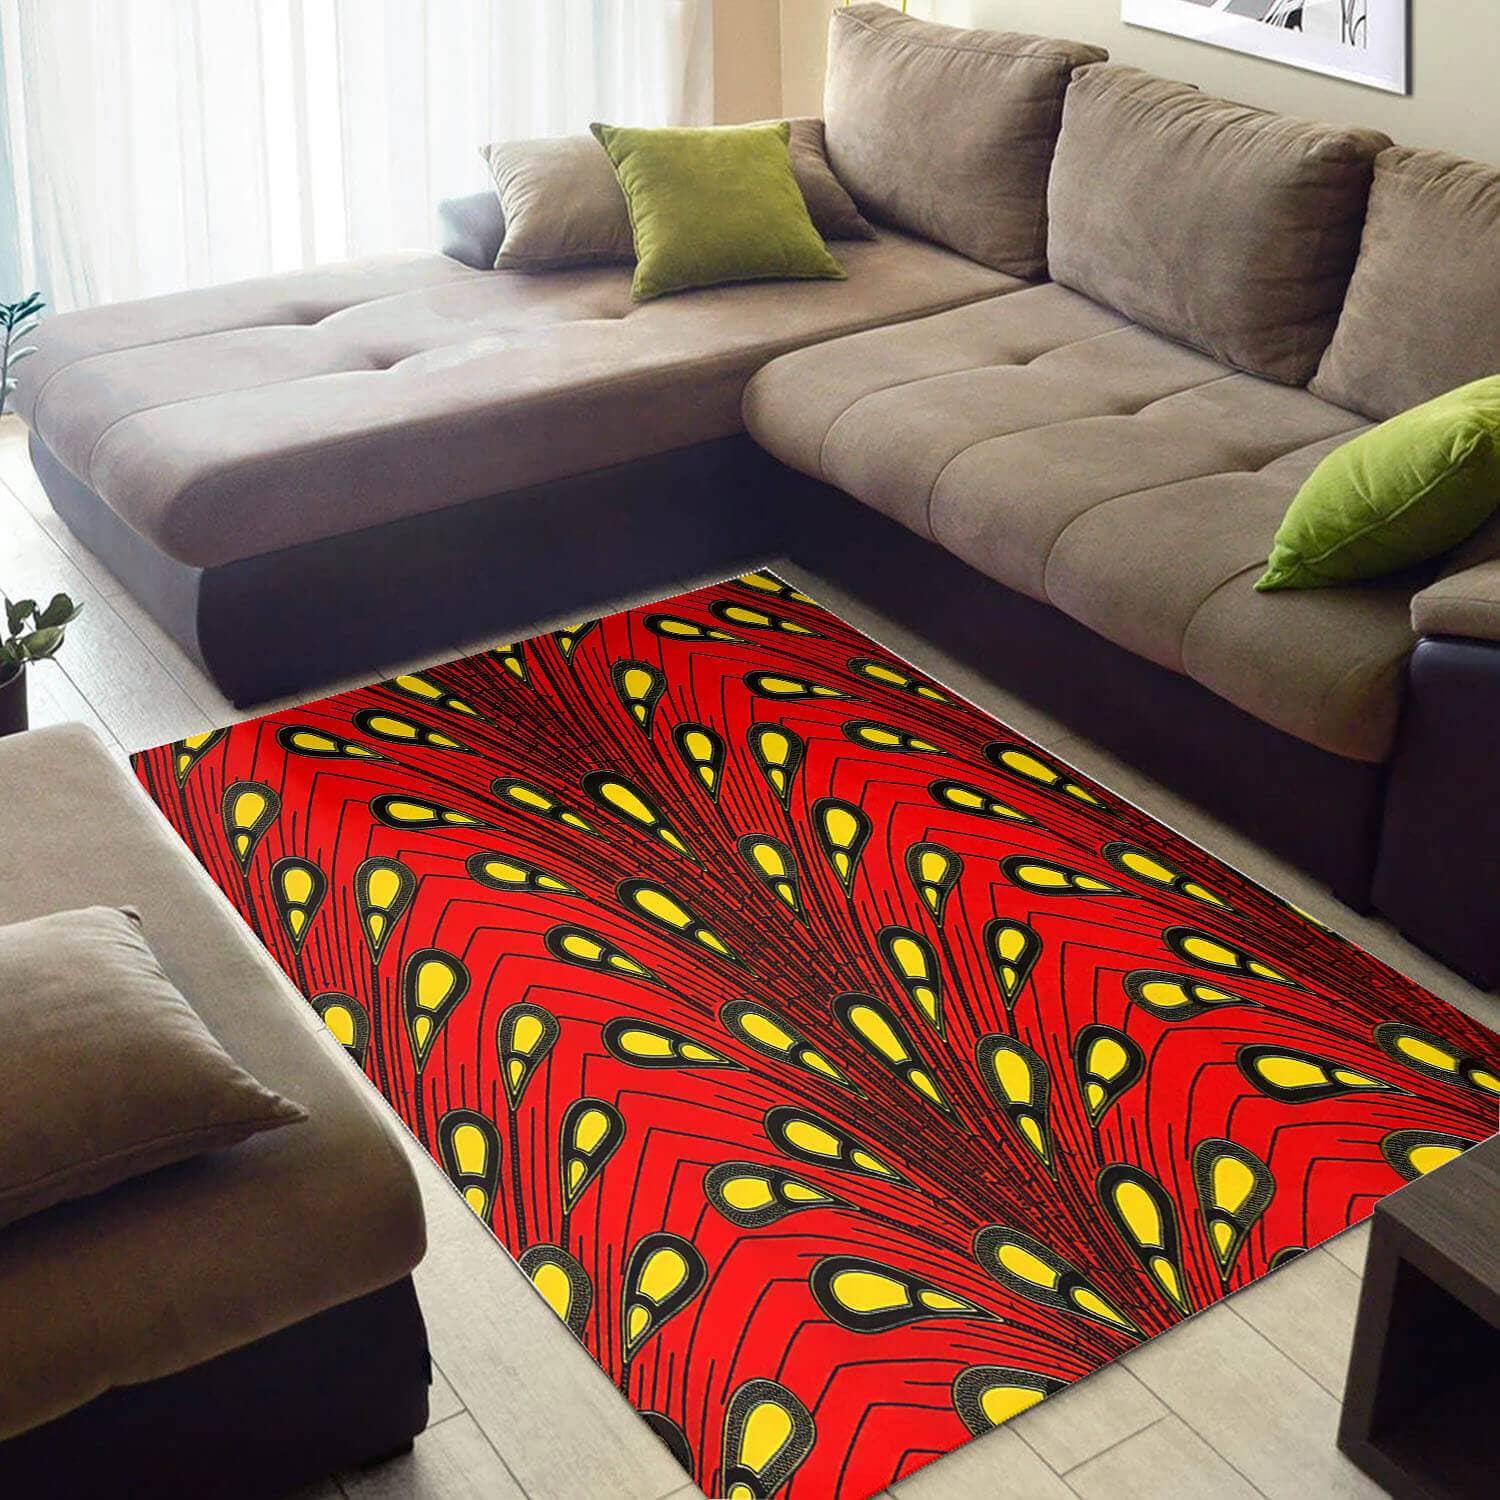 Beautiful African Vintage American Black Art Afrocentric Large Inspired Home Rug